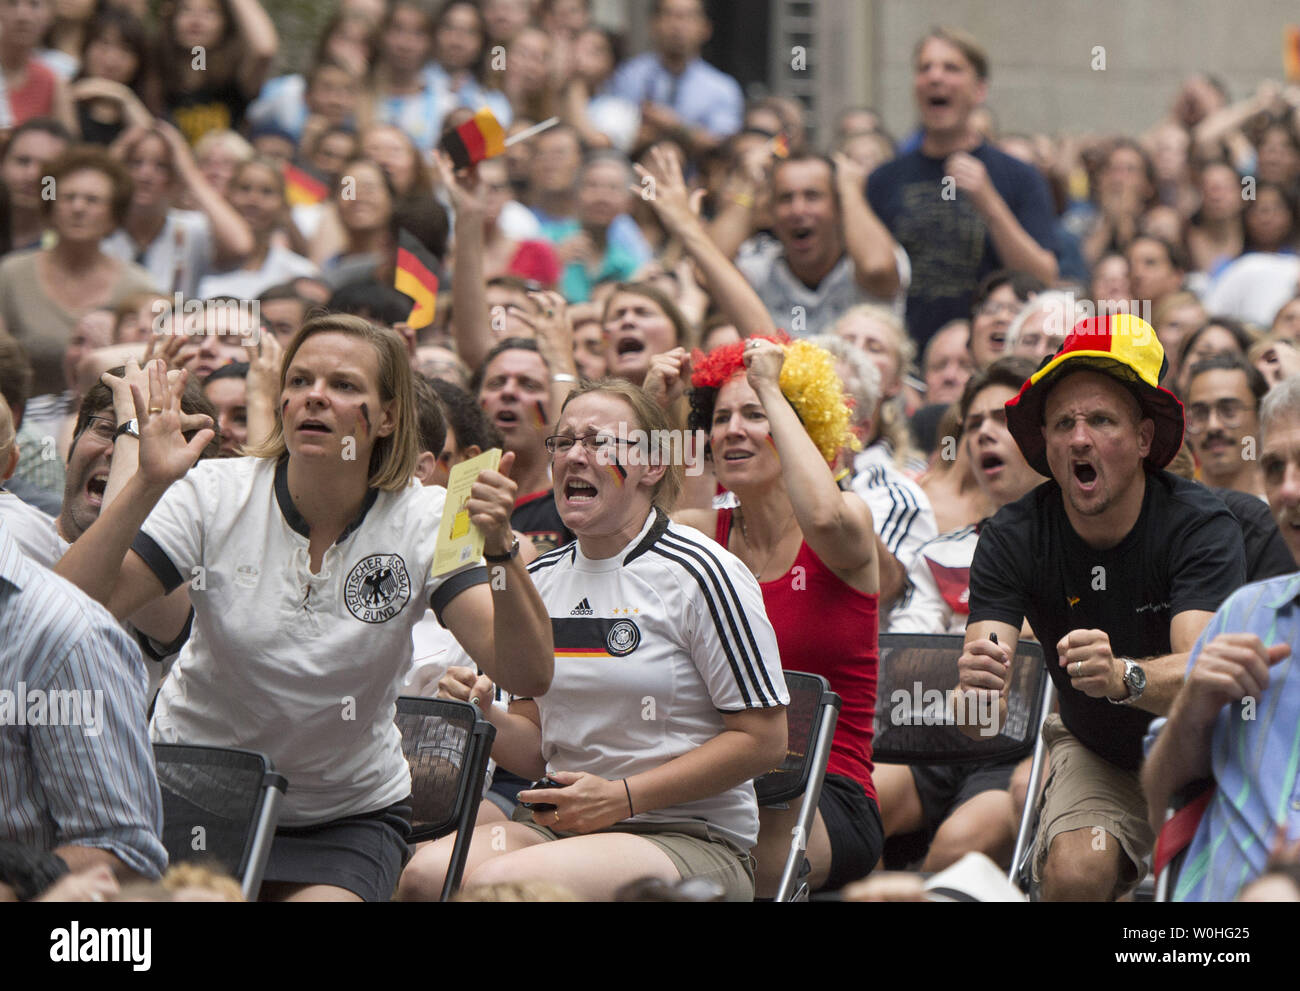 German fans react as they watch the 2014 World Cup final between Germany and Argentina during a watch party held at the Smithsonian Portrait Gallery, in Washington, D.C. on July 13, 2014.  UPI/Kevin Dietsch Stock Photo